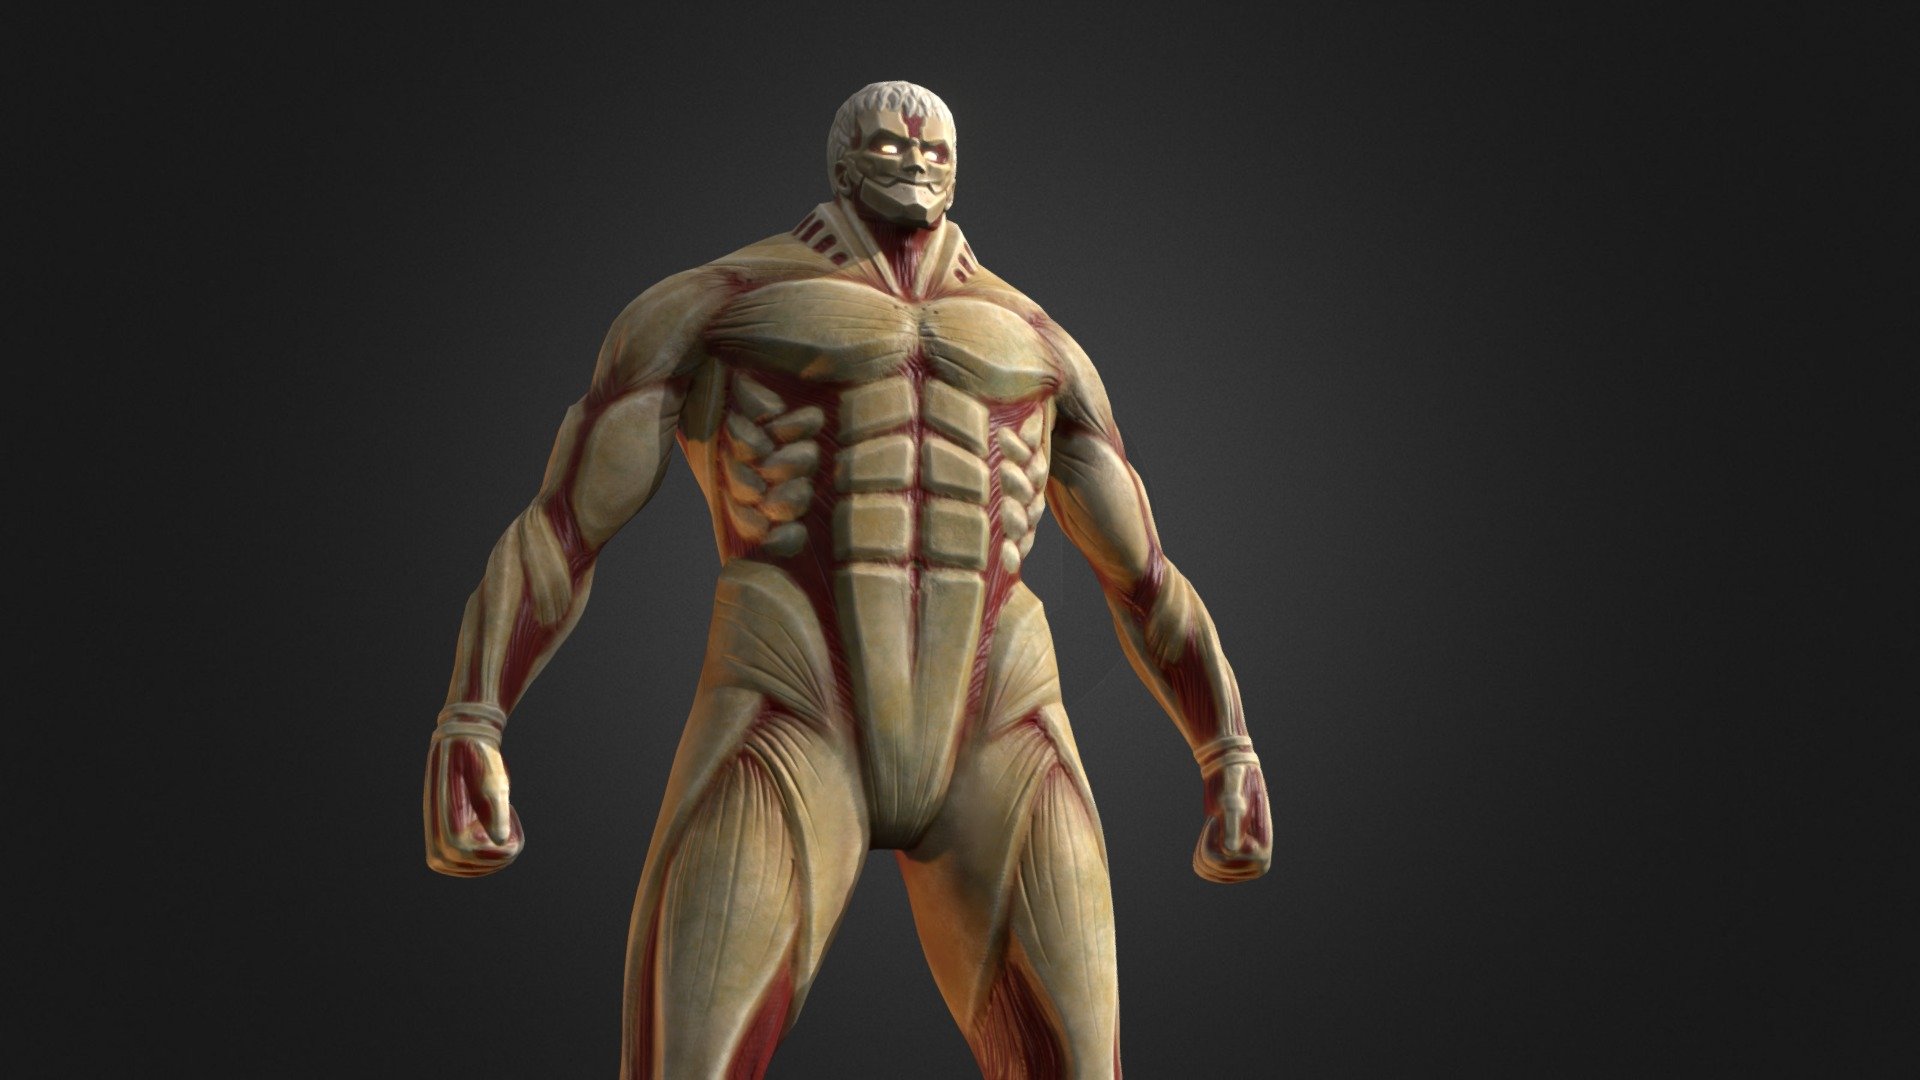 A model of the armored titan from Attack on Titan. It is based on it's appearence in the first season of the anime 3d model